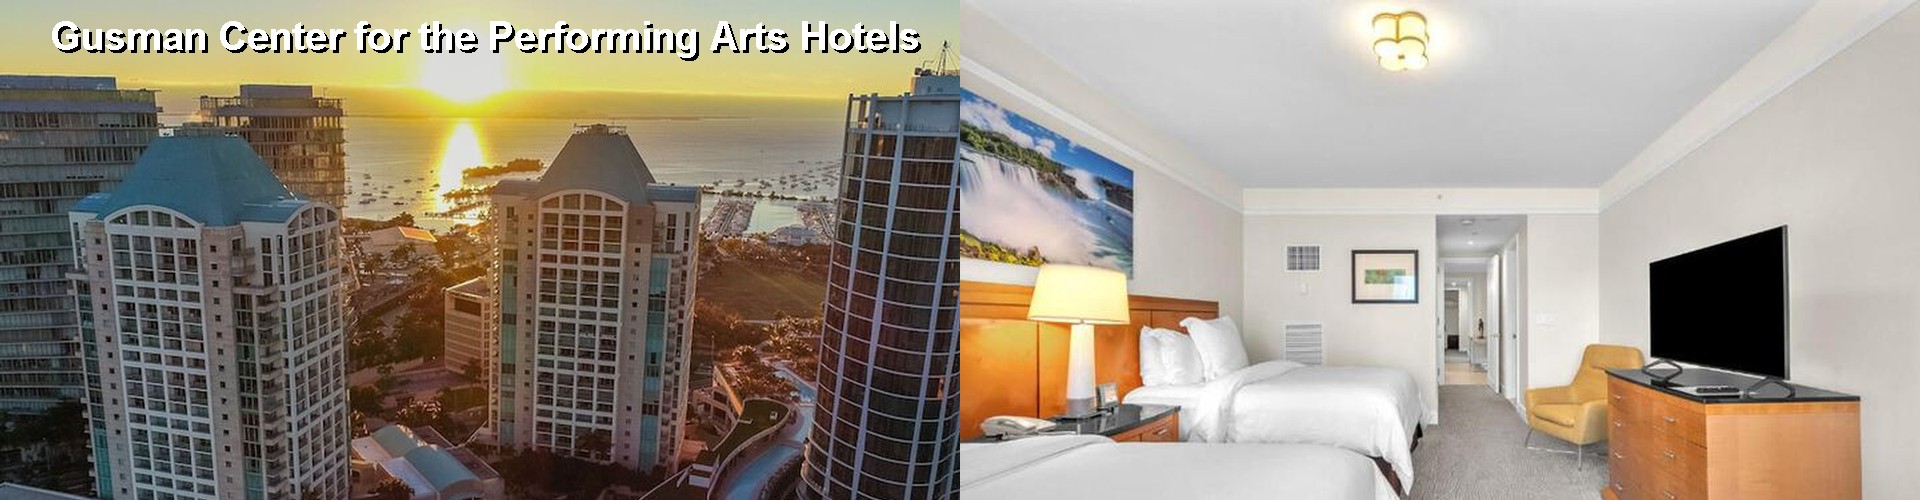 4 Best Hotels near Gusman Center for the Performing Arts